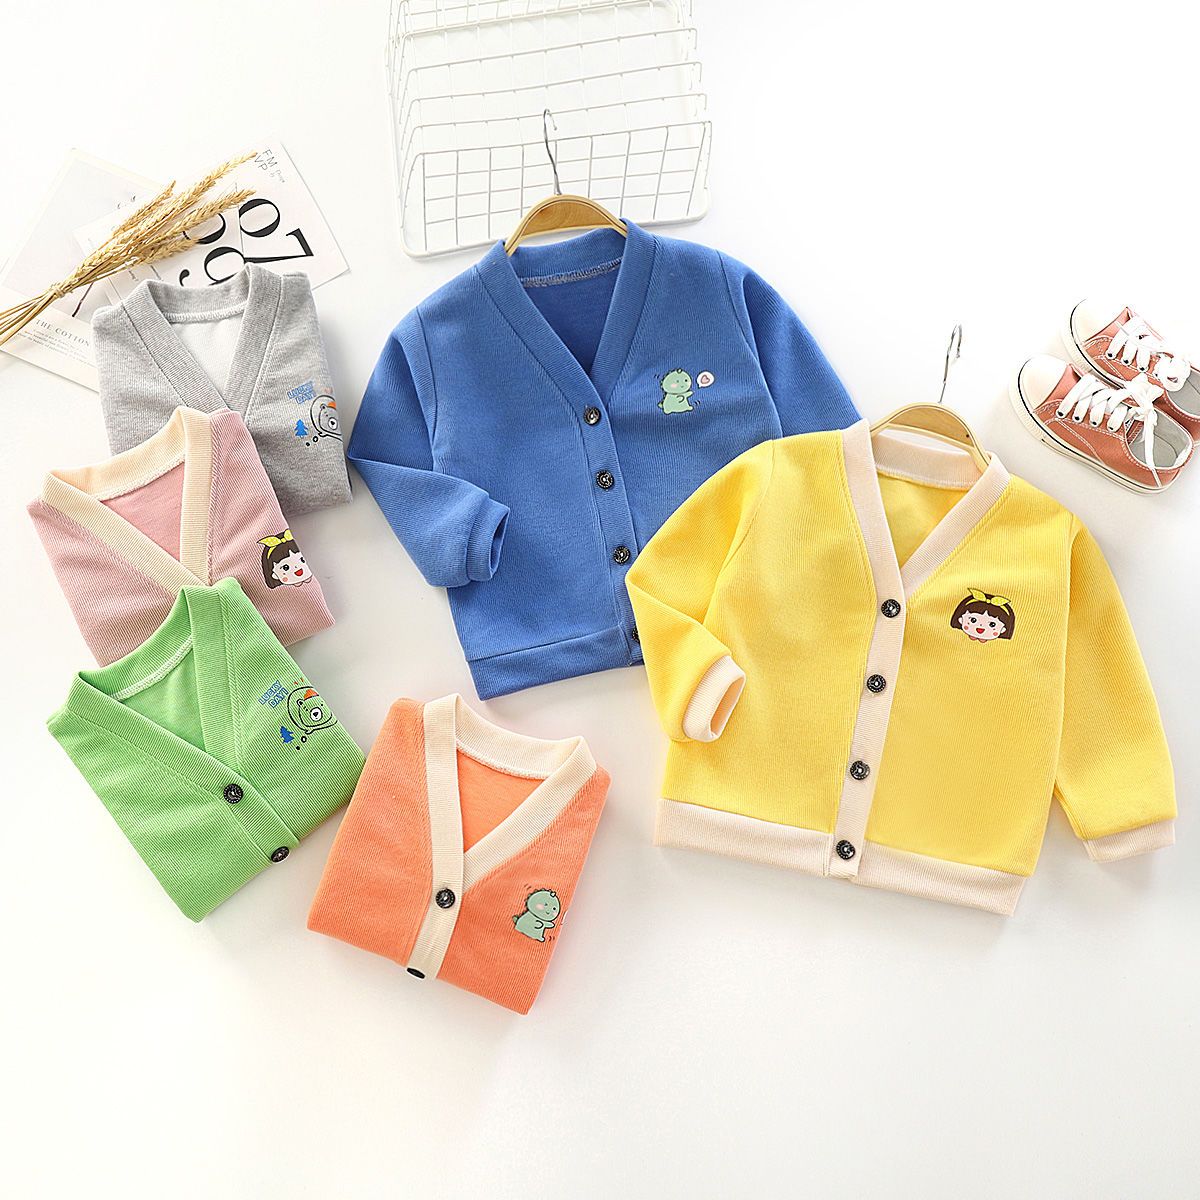 New children's knitted jackets for boys and girls, spring and autumn Korean style bottoming shirts, cardigans, baby fashion knitted sweaters tops